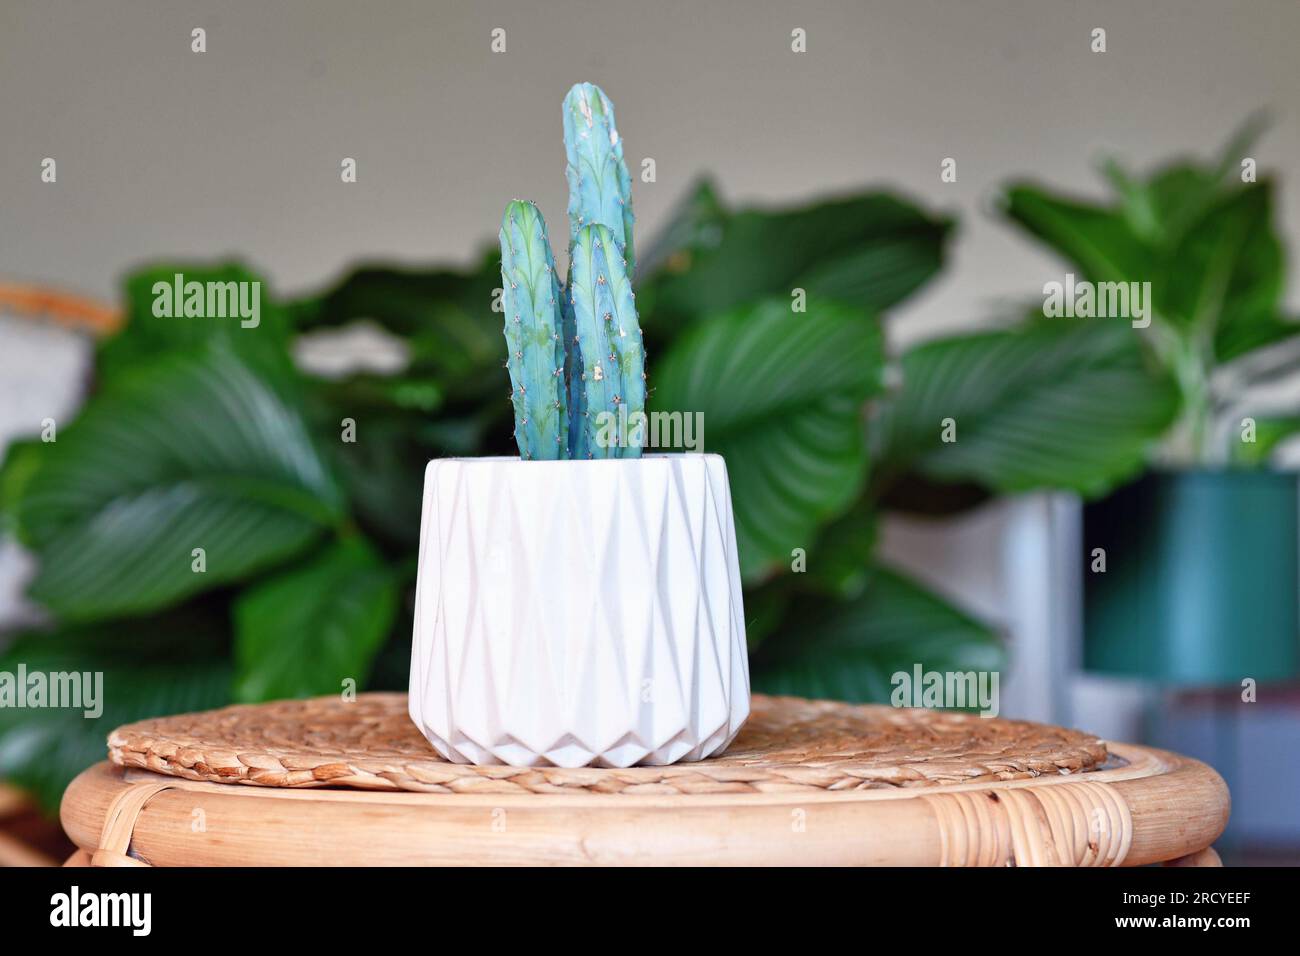 Potted Cereus Cactus houseplant on wooden table with other plants in blurry living room background Stock Photo